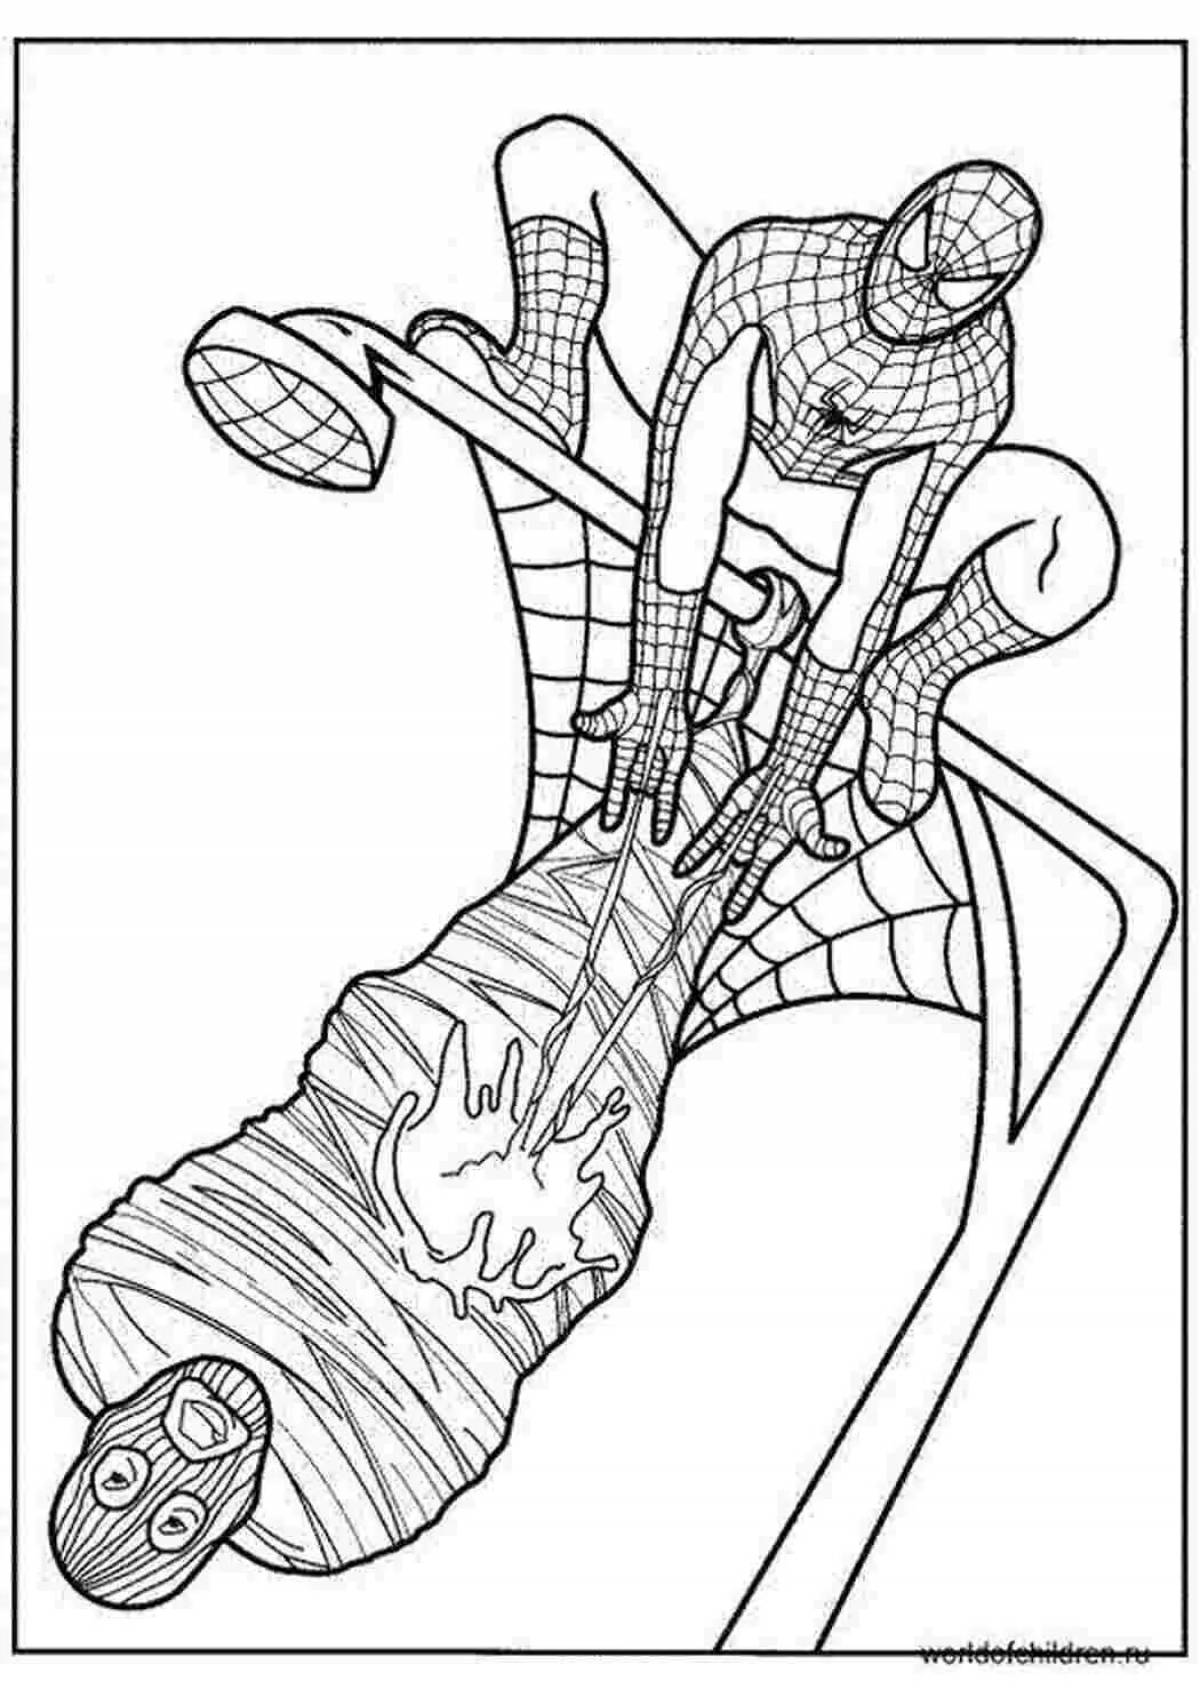 Spiderman glowing Christmas coloring page